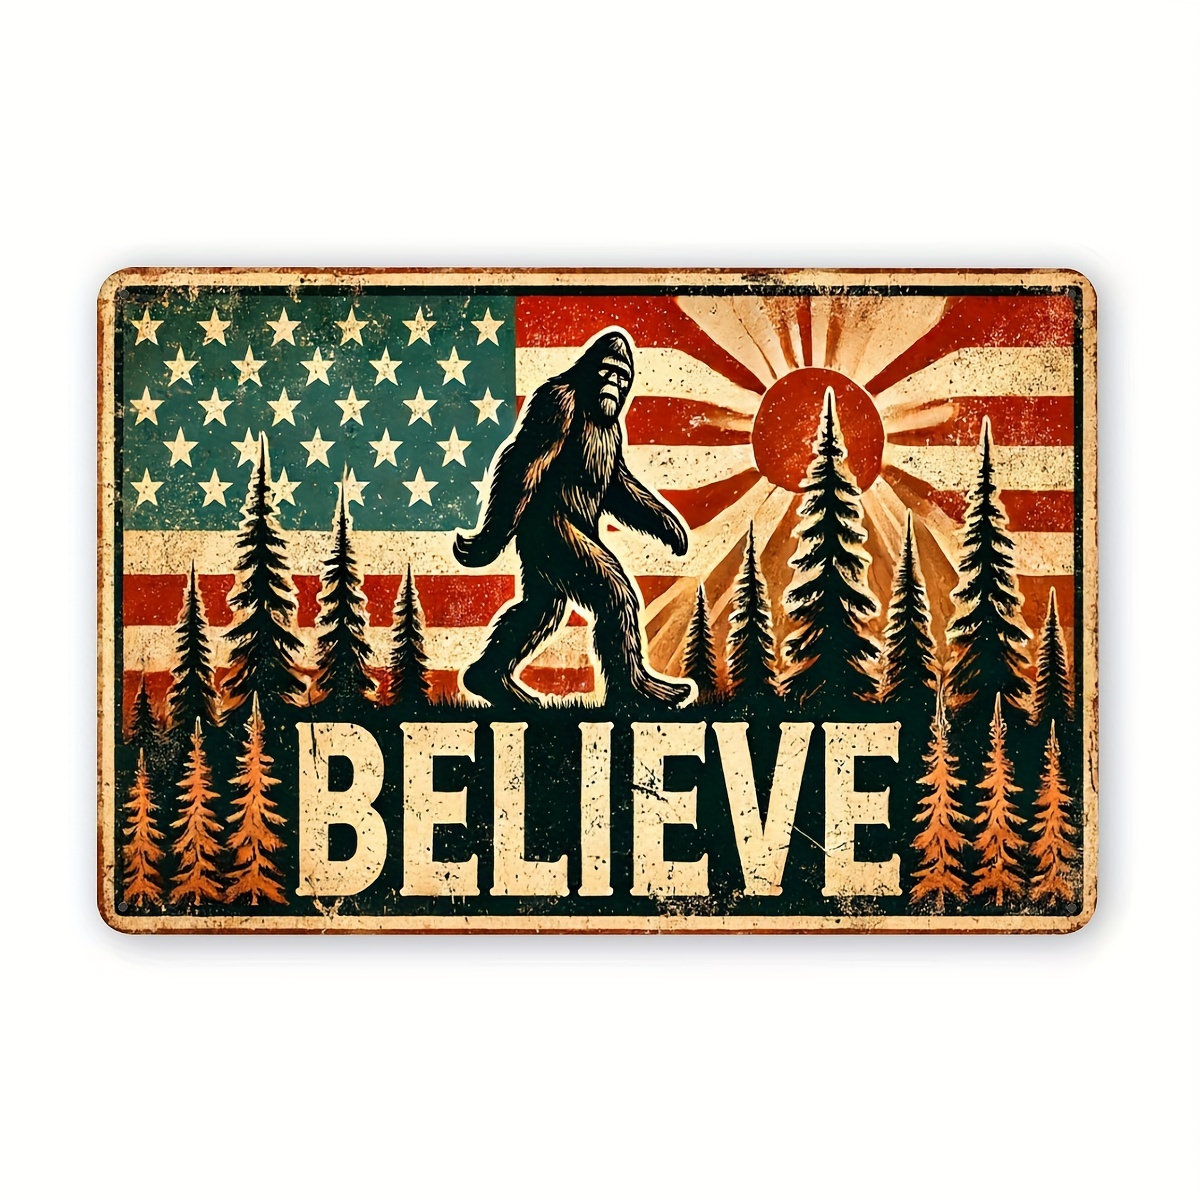 

Vintage American Flag "believe" Sasquatch Wall Decor Sign, Iron Metal Tin Signage For Home, Bar, Restaurant - 8x12 Inch Retro Iron Plaque With Forest And Sunrise Design (1 Piece)